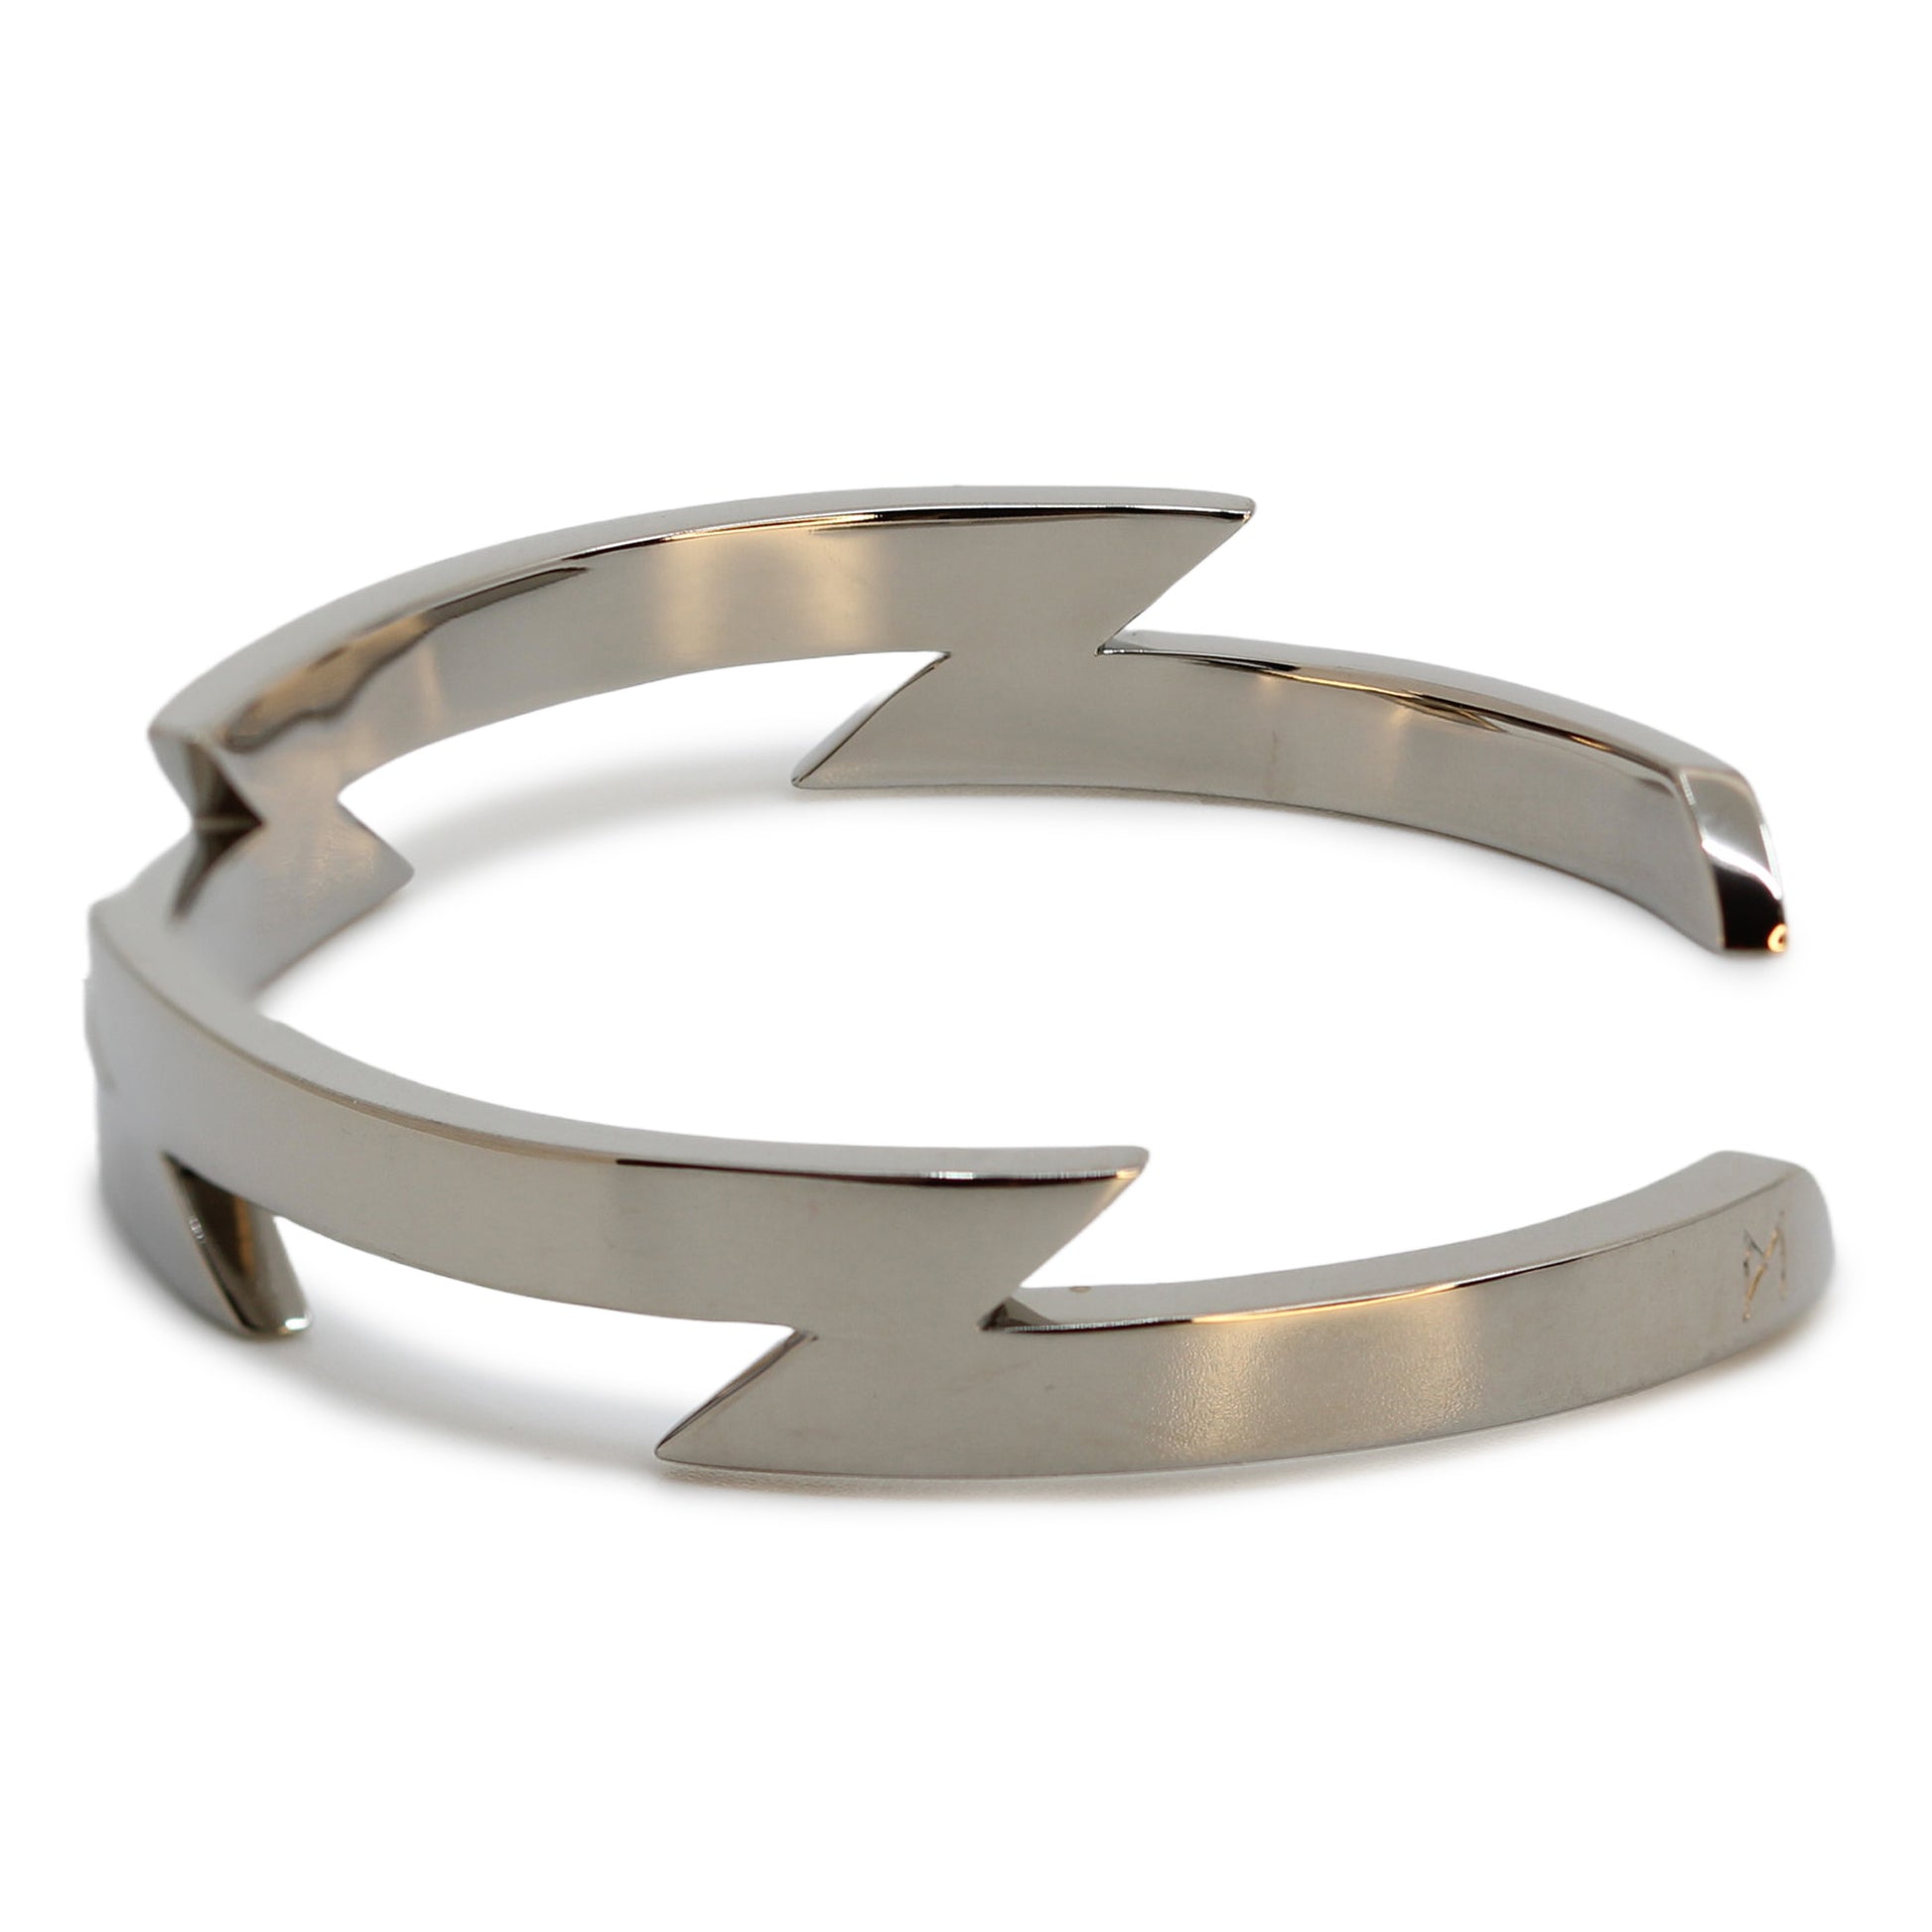 Single silver-colored titanium bangle with zig-zag pattern, 1 cm thick. Image shows side view of bangle.